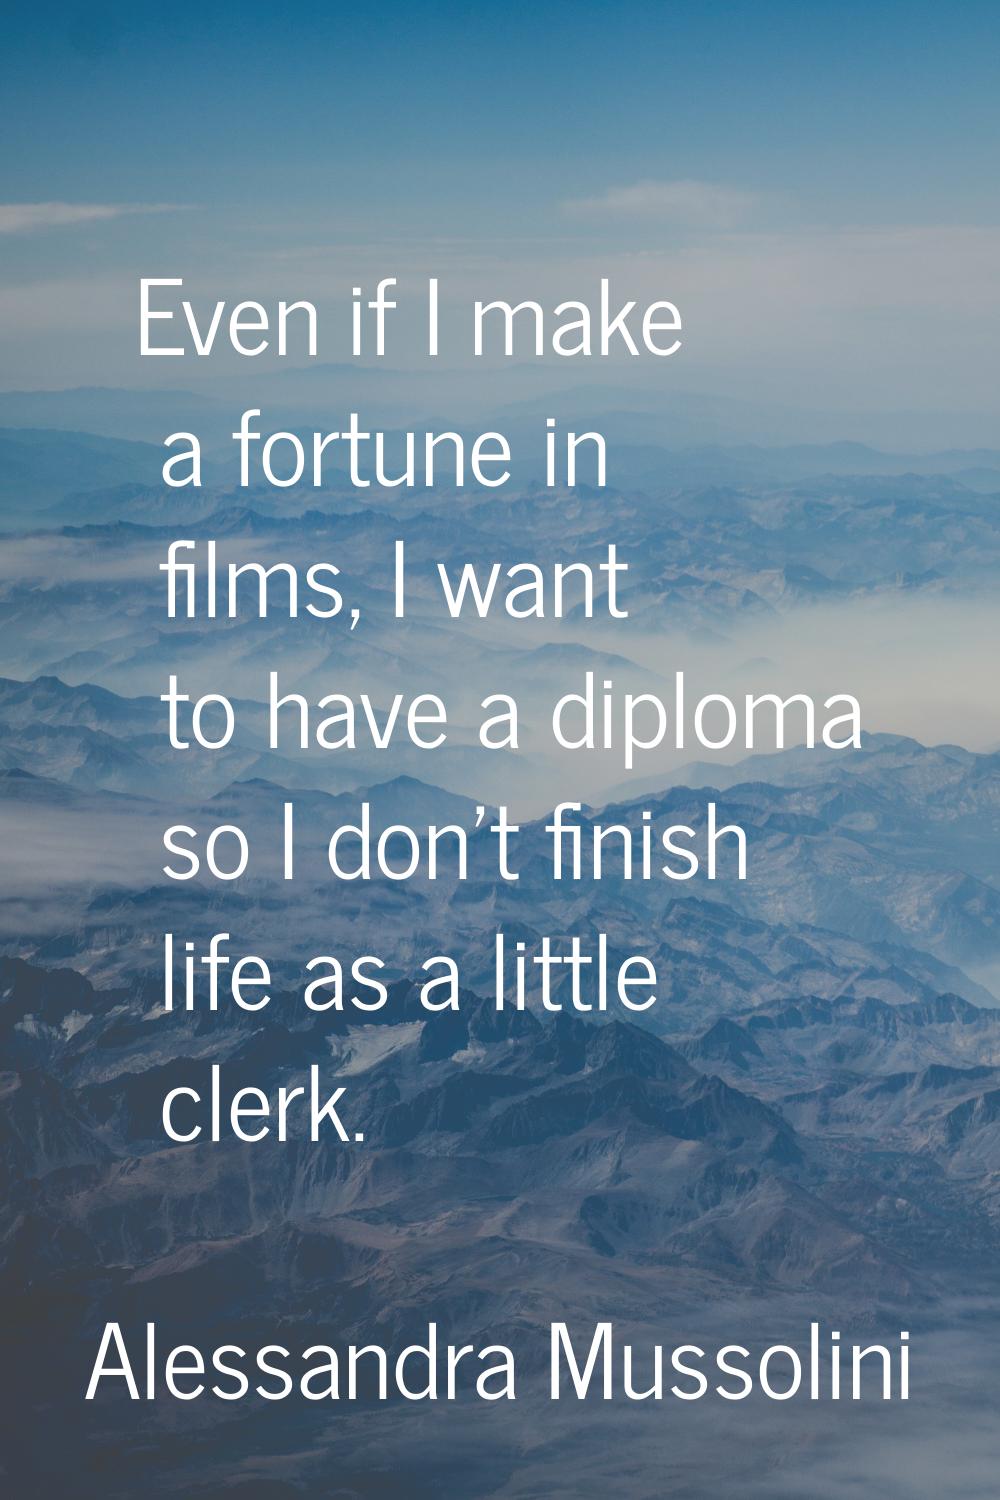 Even if I make a fortune in films, I want to have a diploma so I don't finish life as a little cler